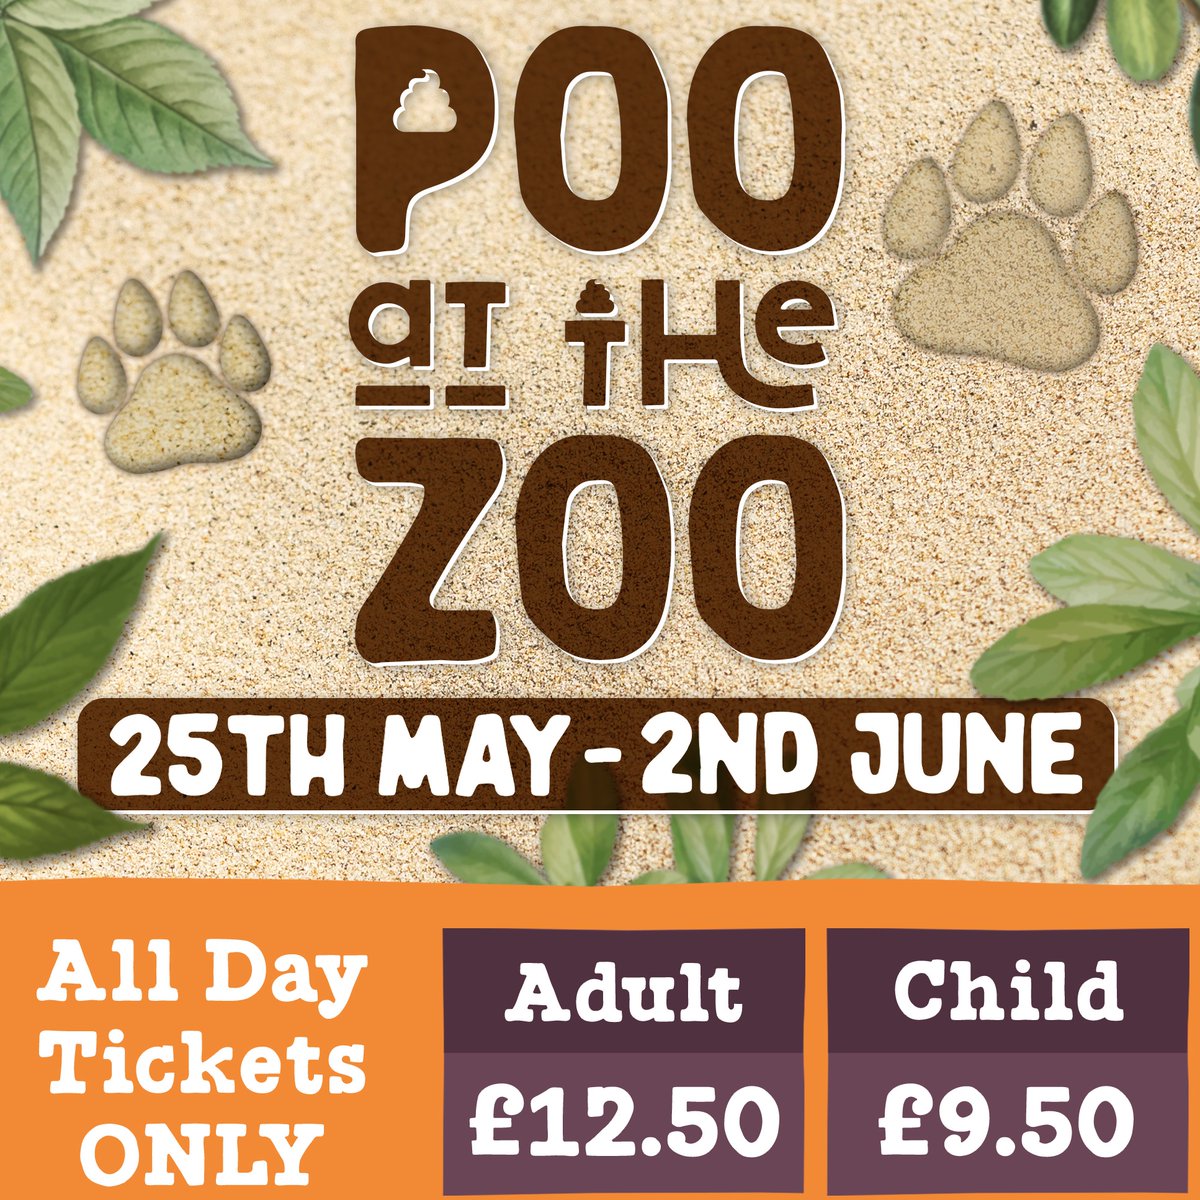 Poo at the Zoo is coming this half-term! Half-term activities include a poo-themed trail, keeper talks (with real animal poo!), bug handling, plus much more! Book your tickets in advance to save 25%: zsea.org/reserve/poo-at…